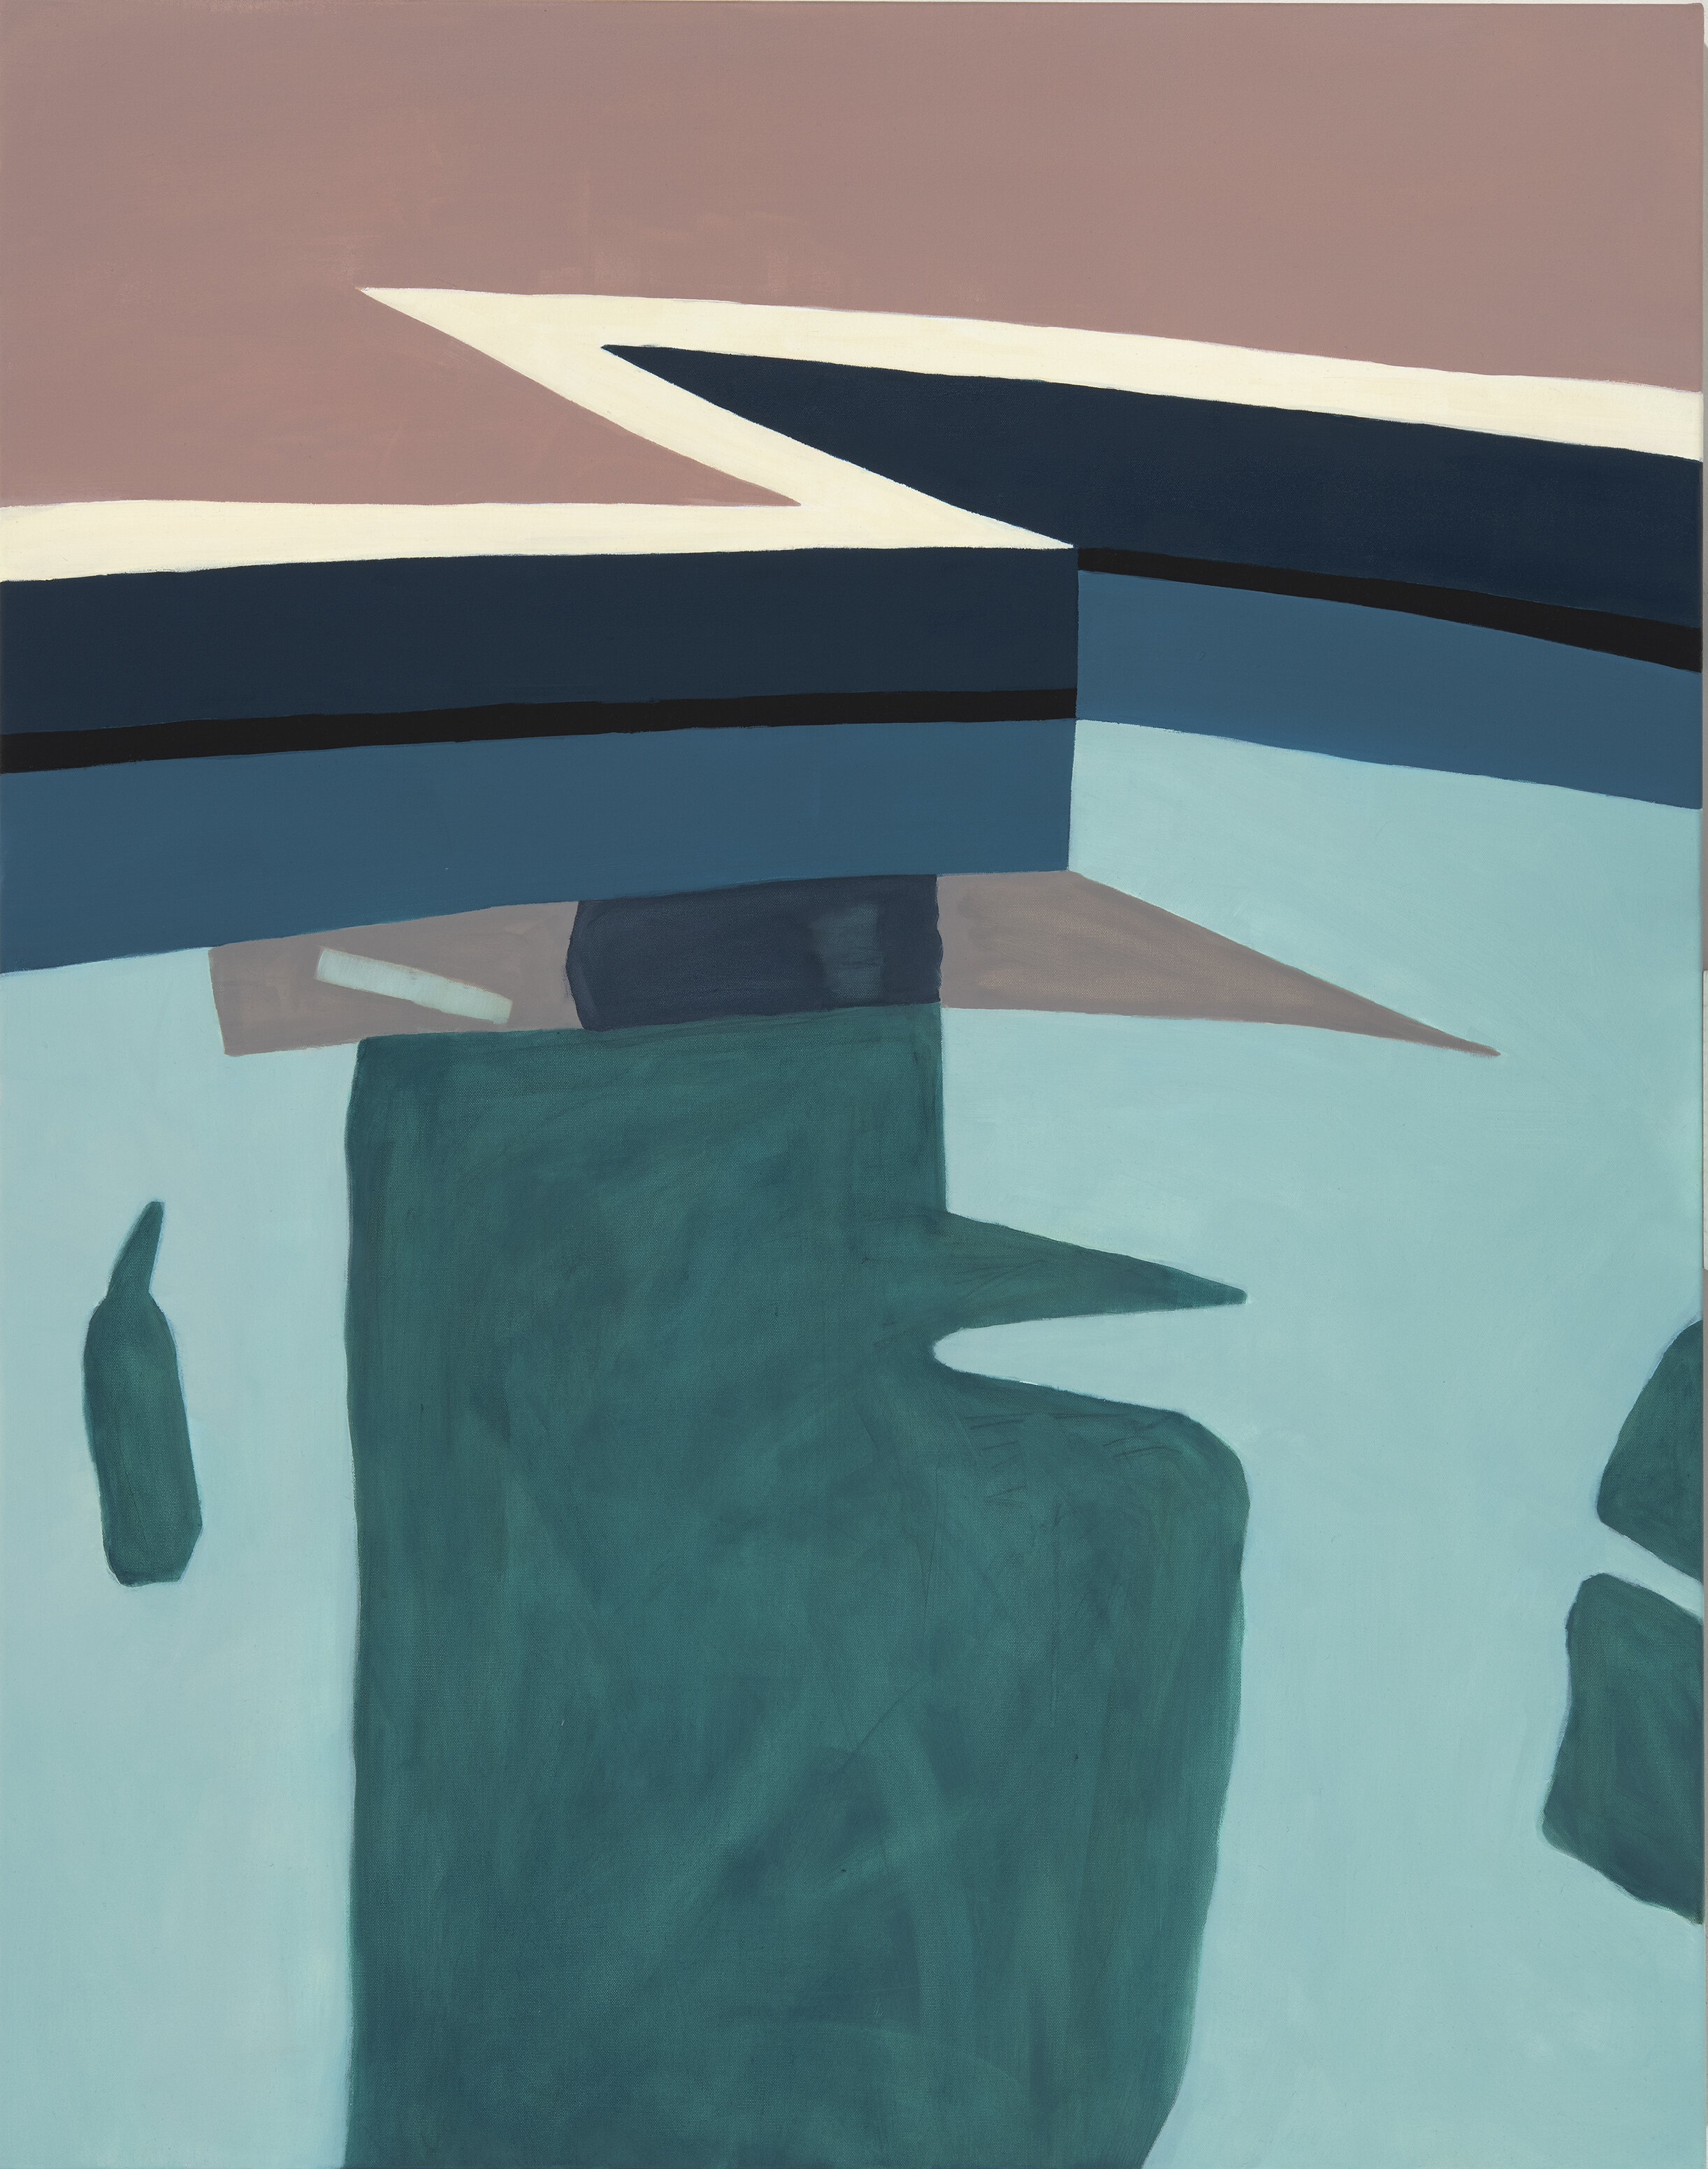 Pool No. 1, oil on polyester, 84 x 107 cm, box framed